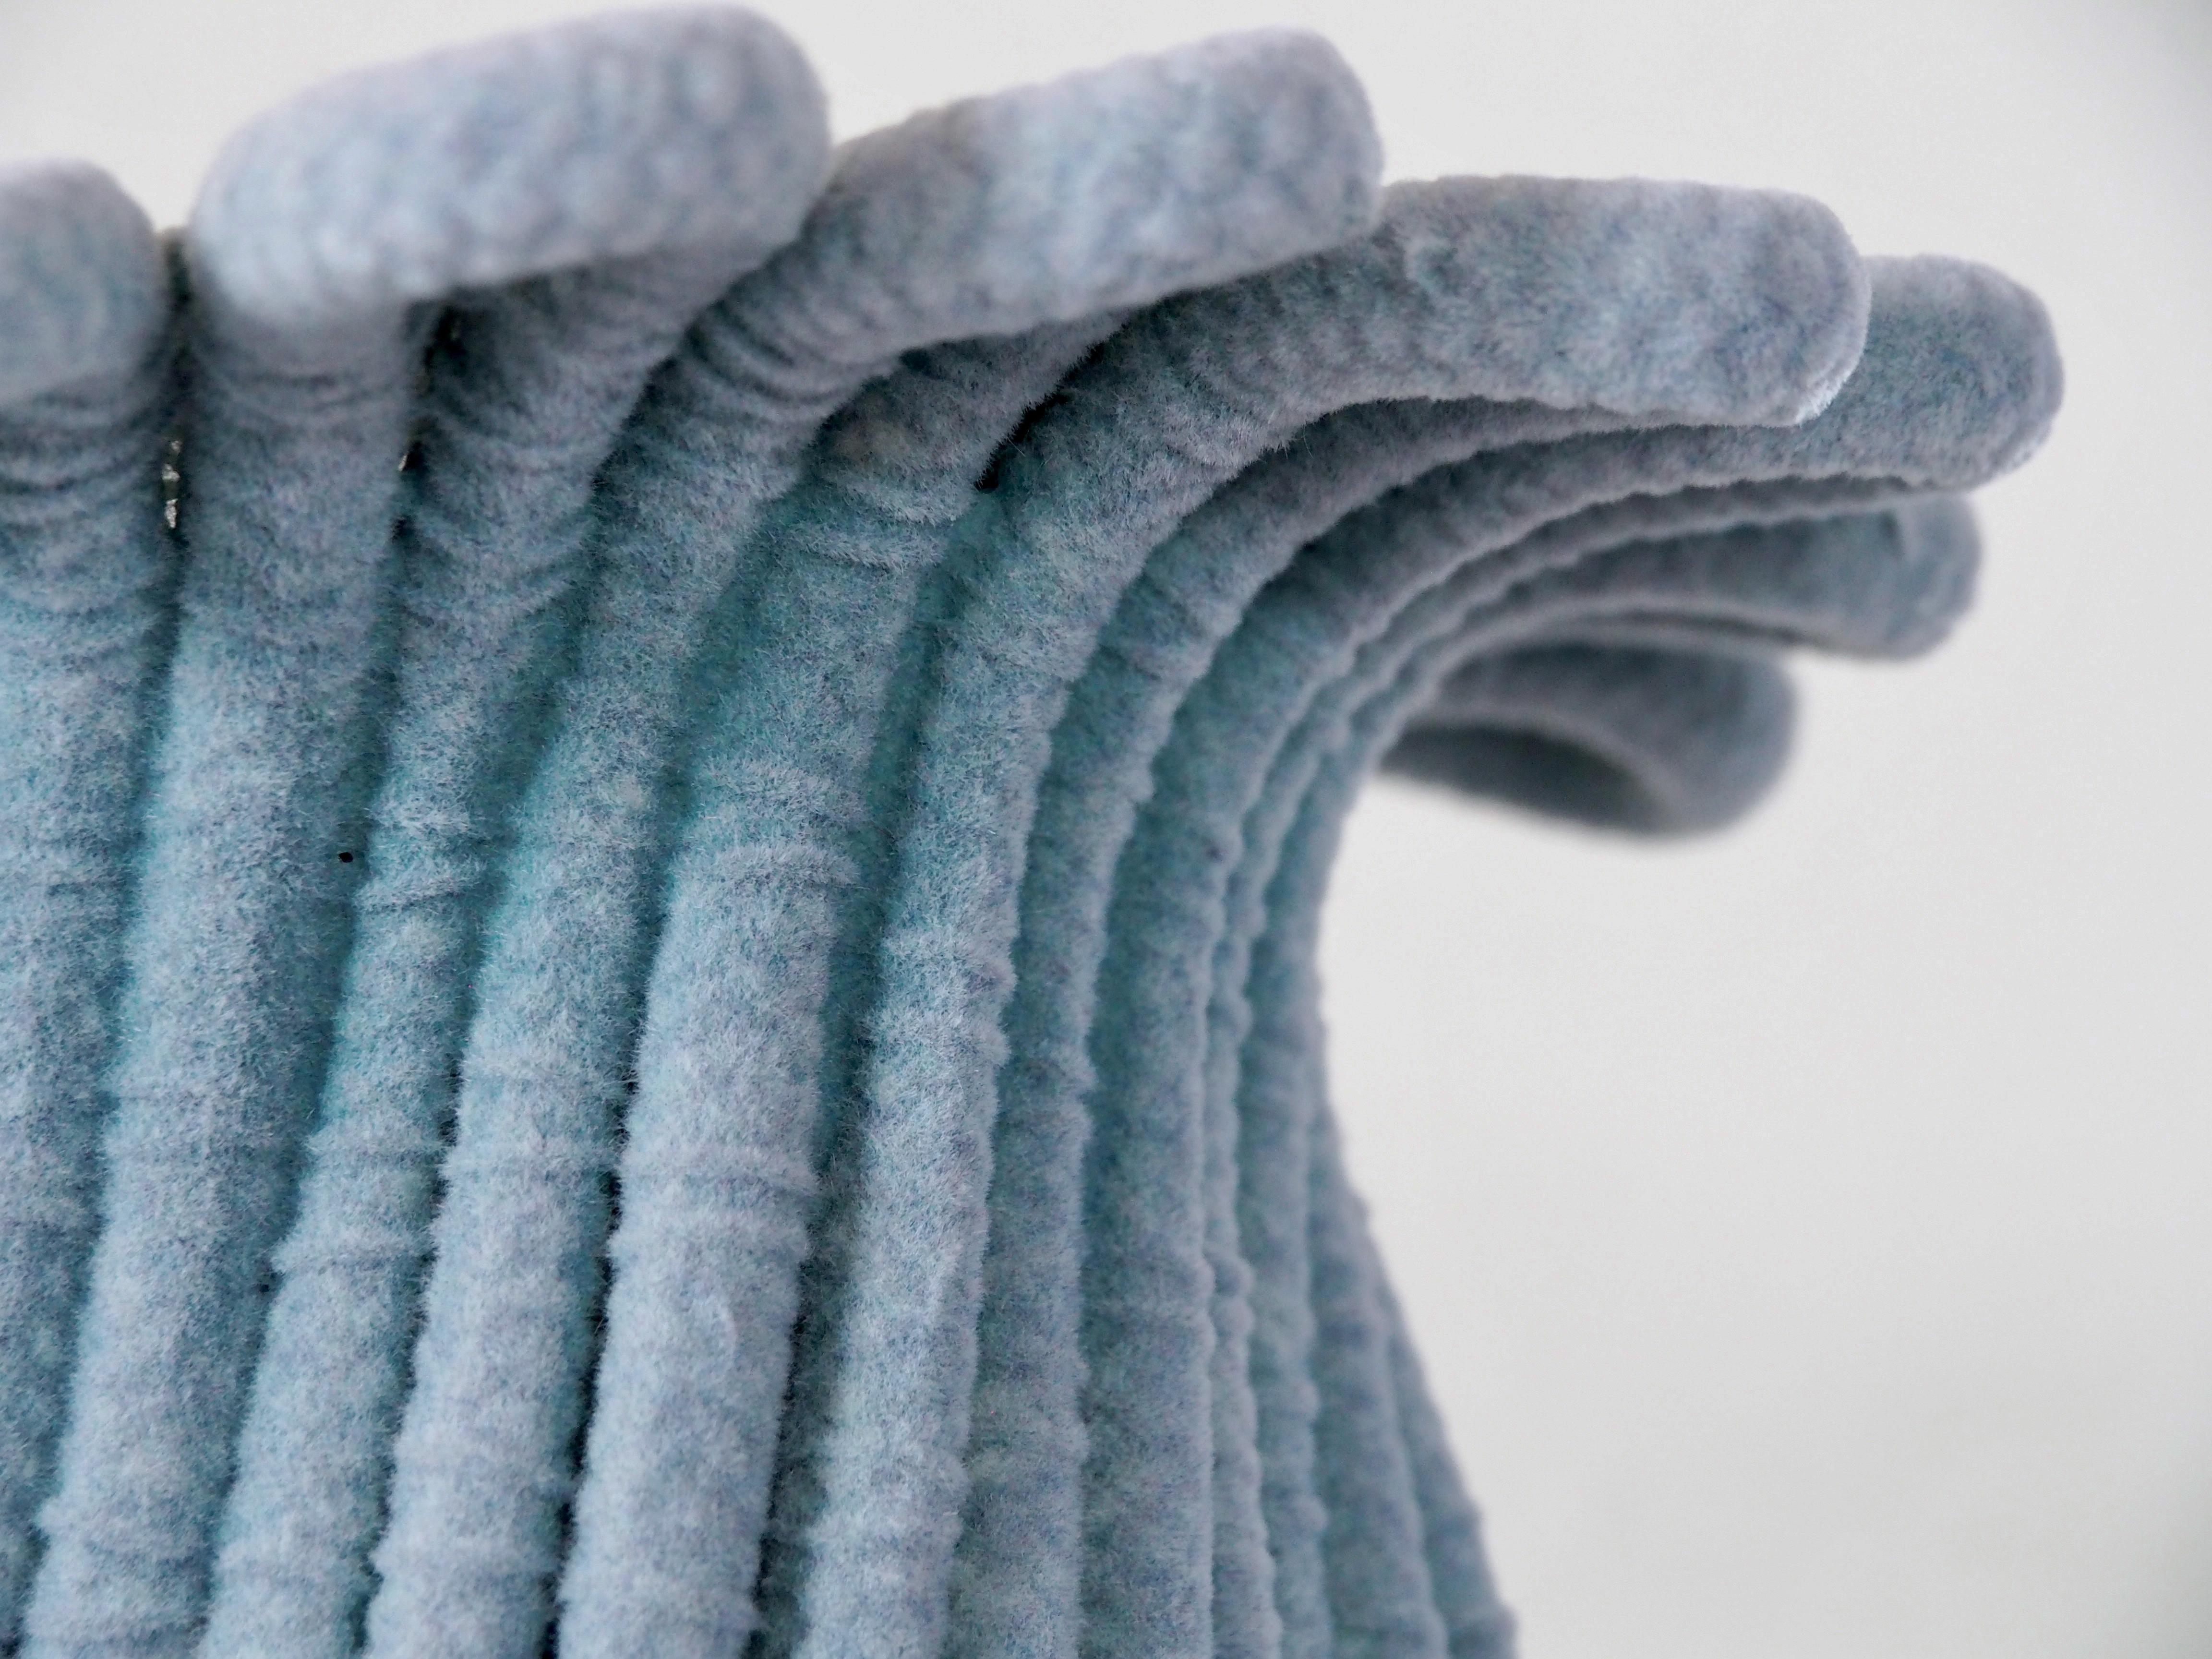 The Reef Series combines an innovative exploration of textile materiality with a refreshing colour scheme and fuzzy tactility. The unique knitting and casting process brings the pieces to life, evocative of coral reefs and underwater life. Due to